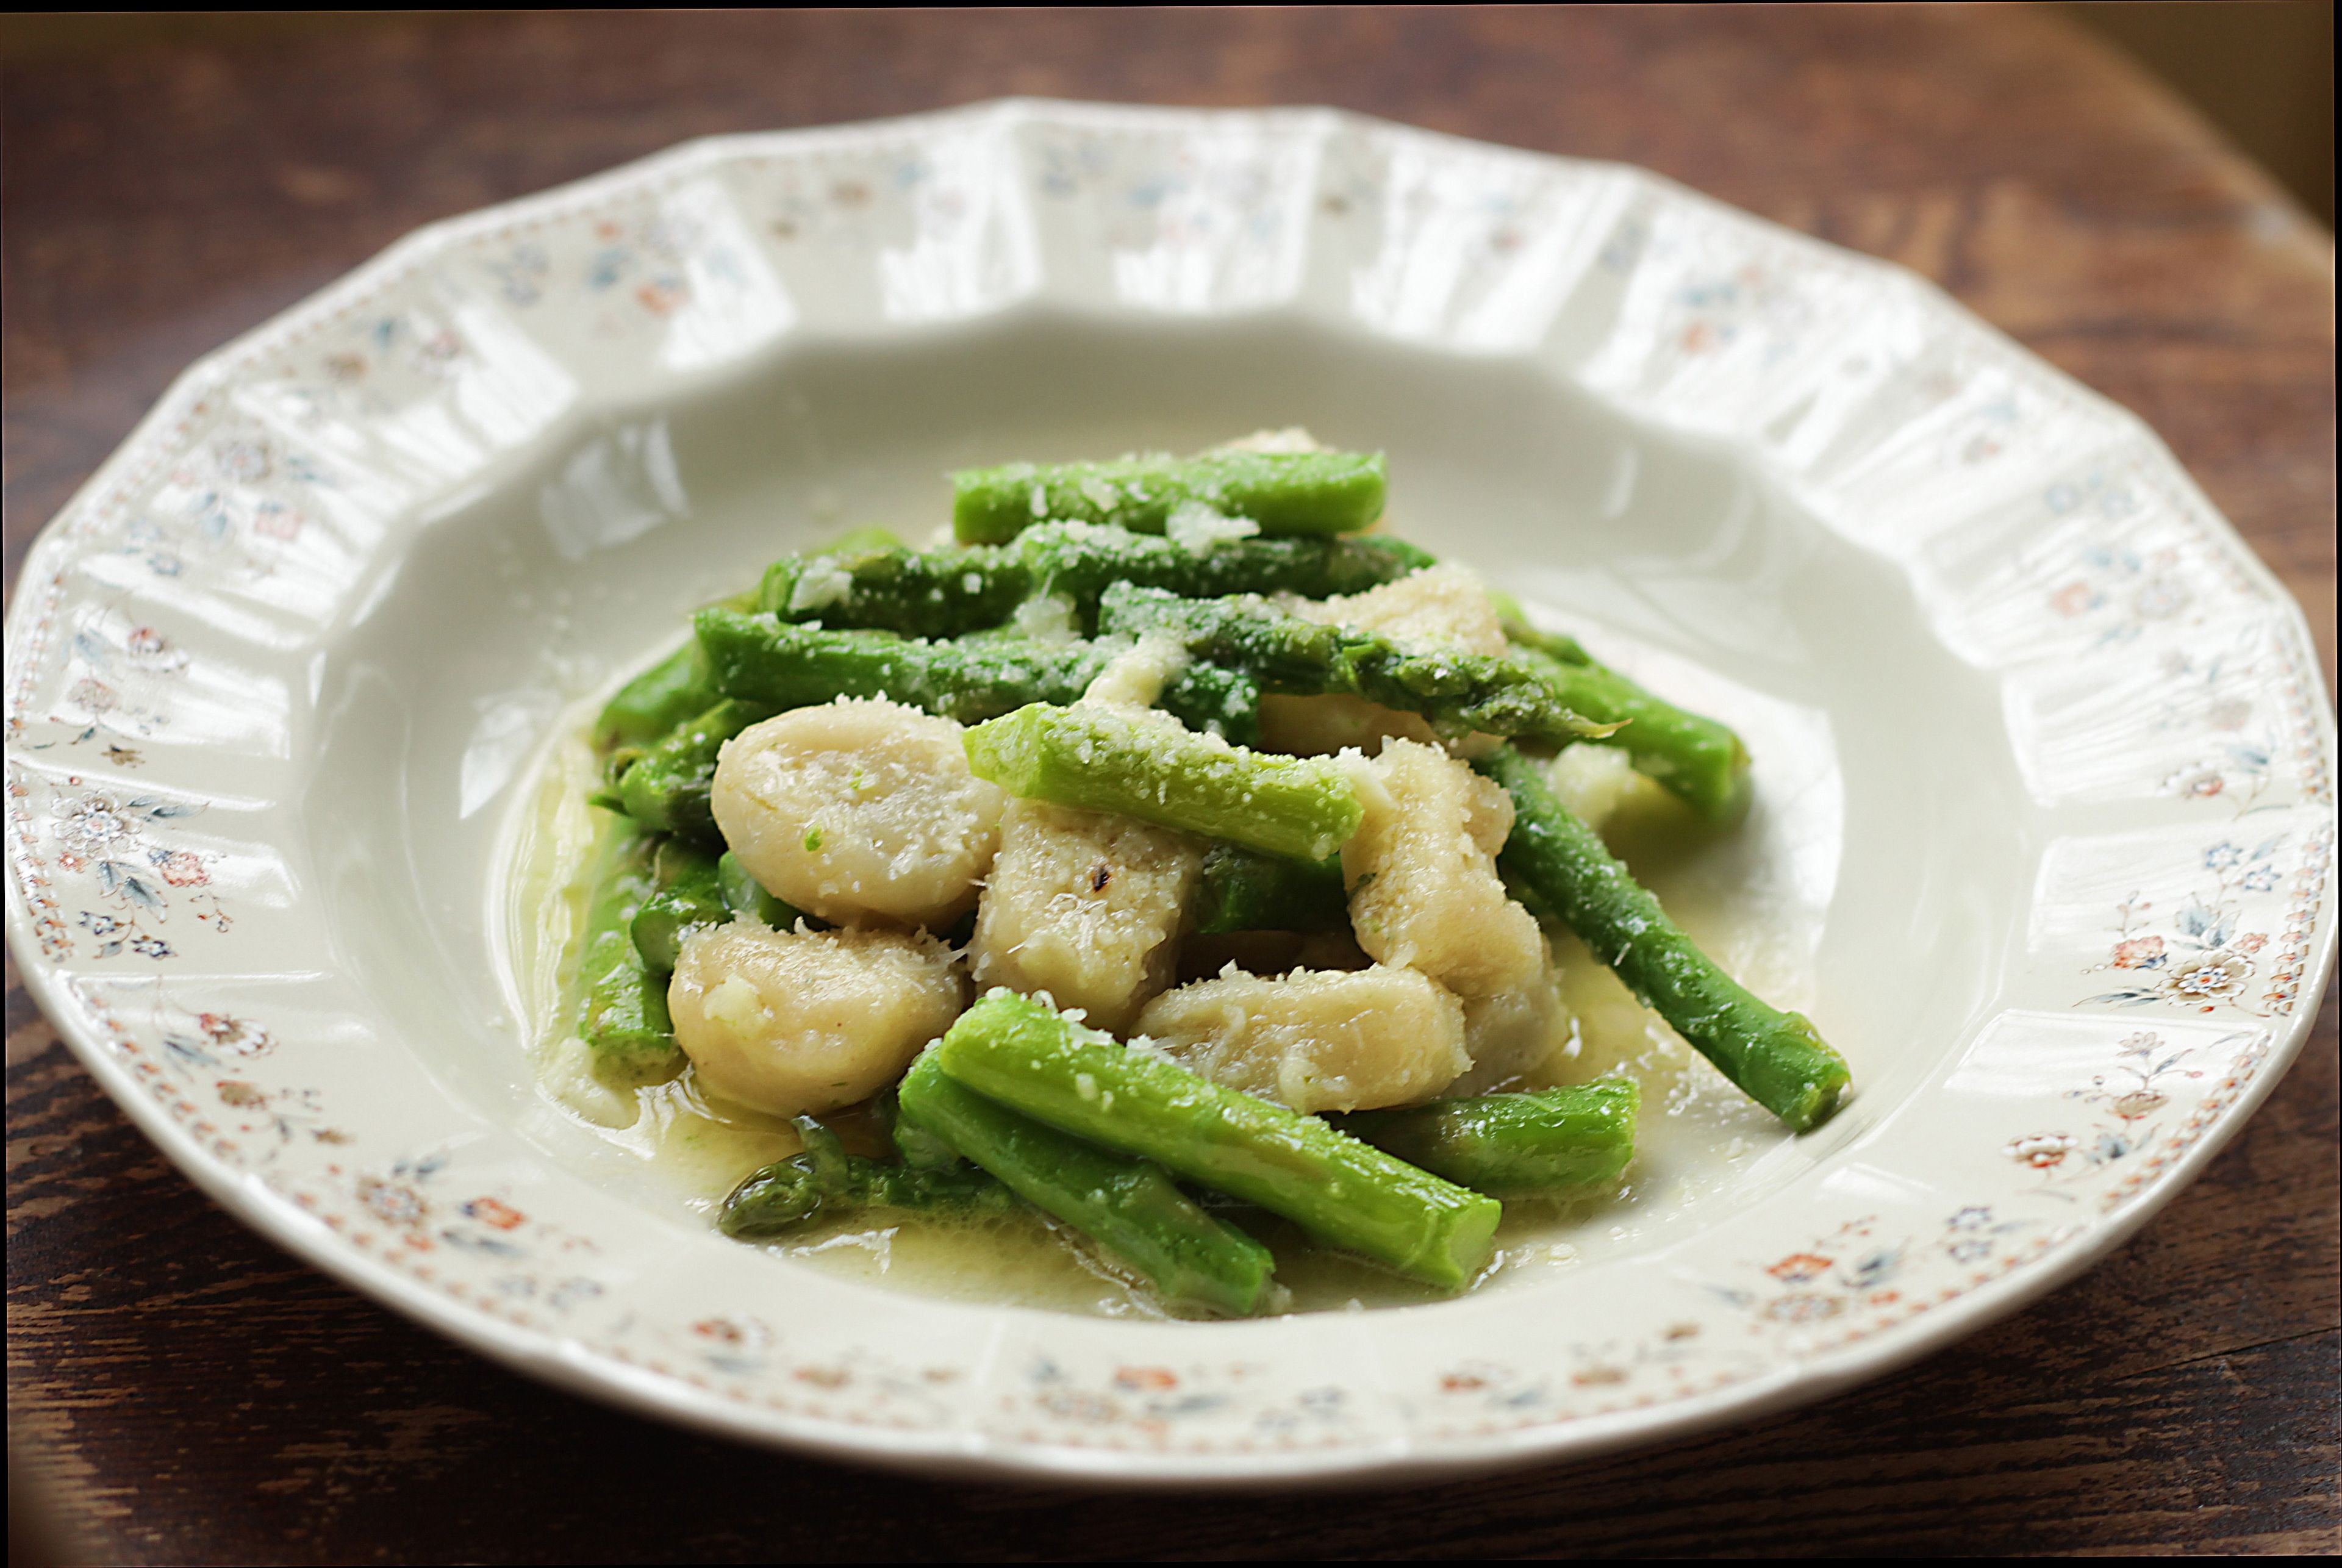 A meal of pasta and green beans in a bowl.